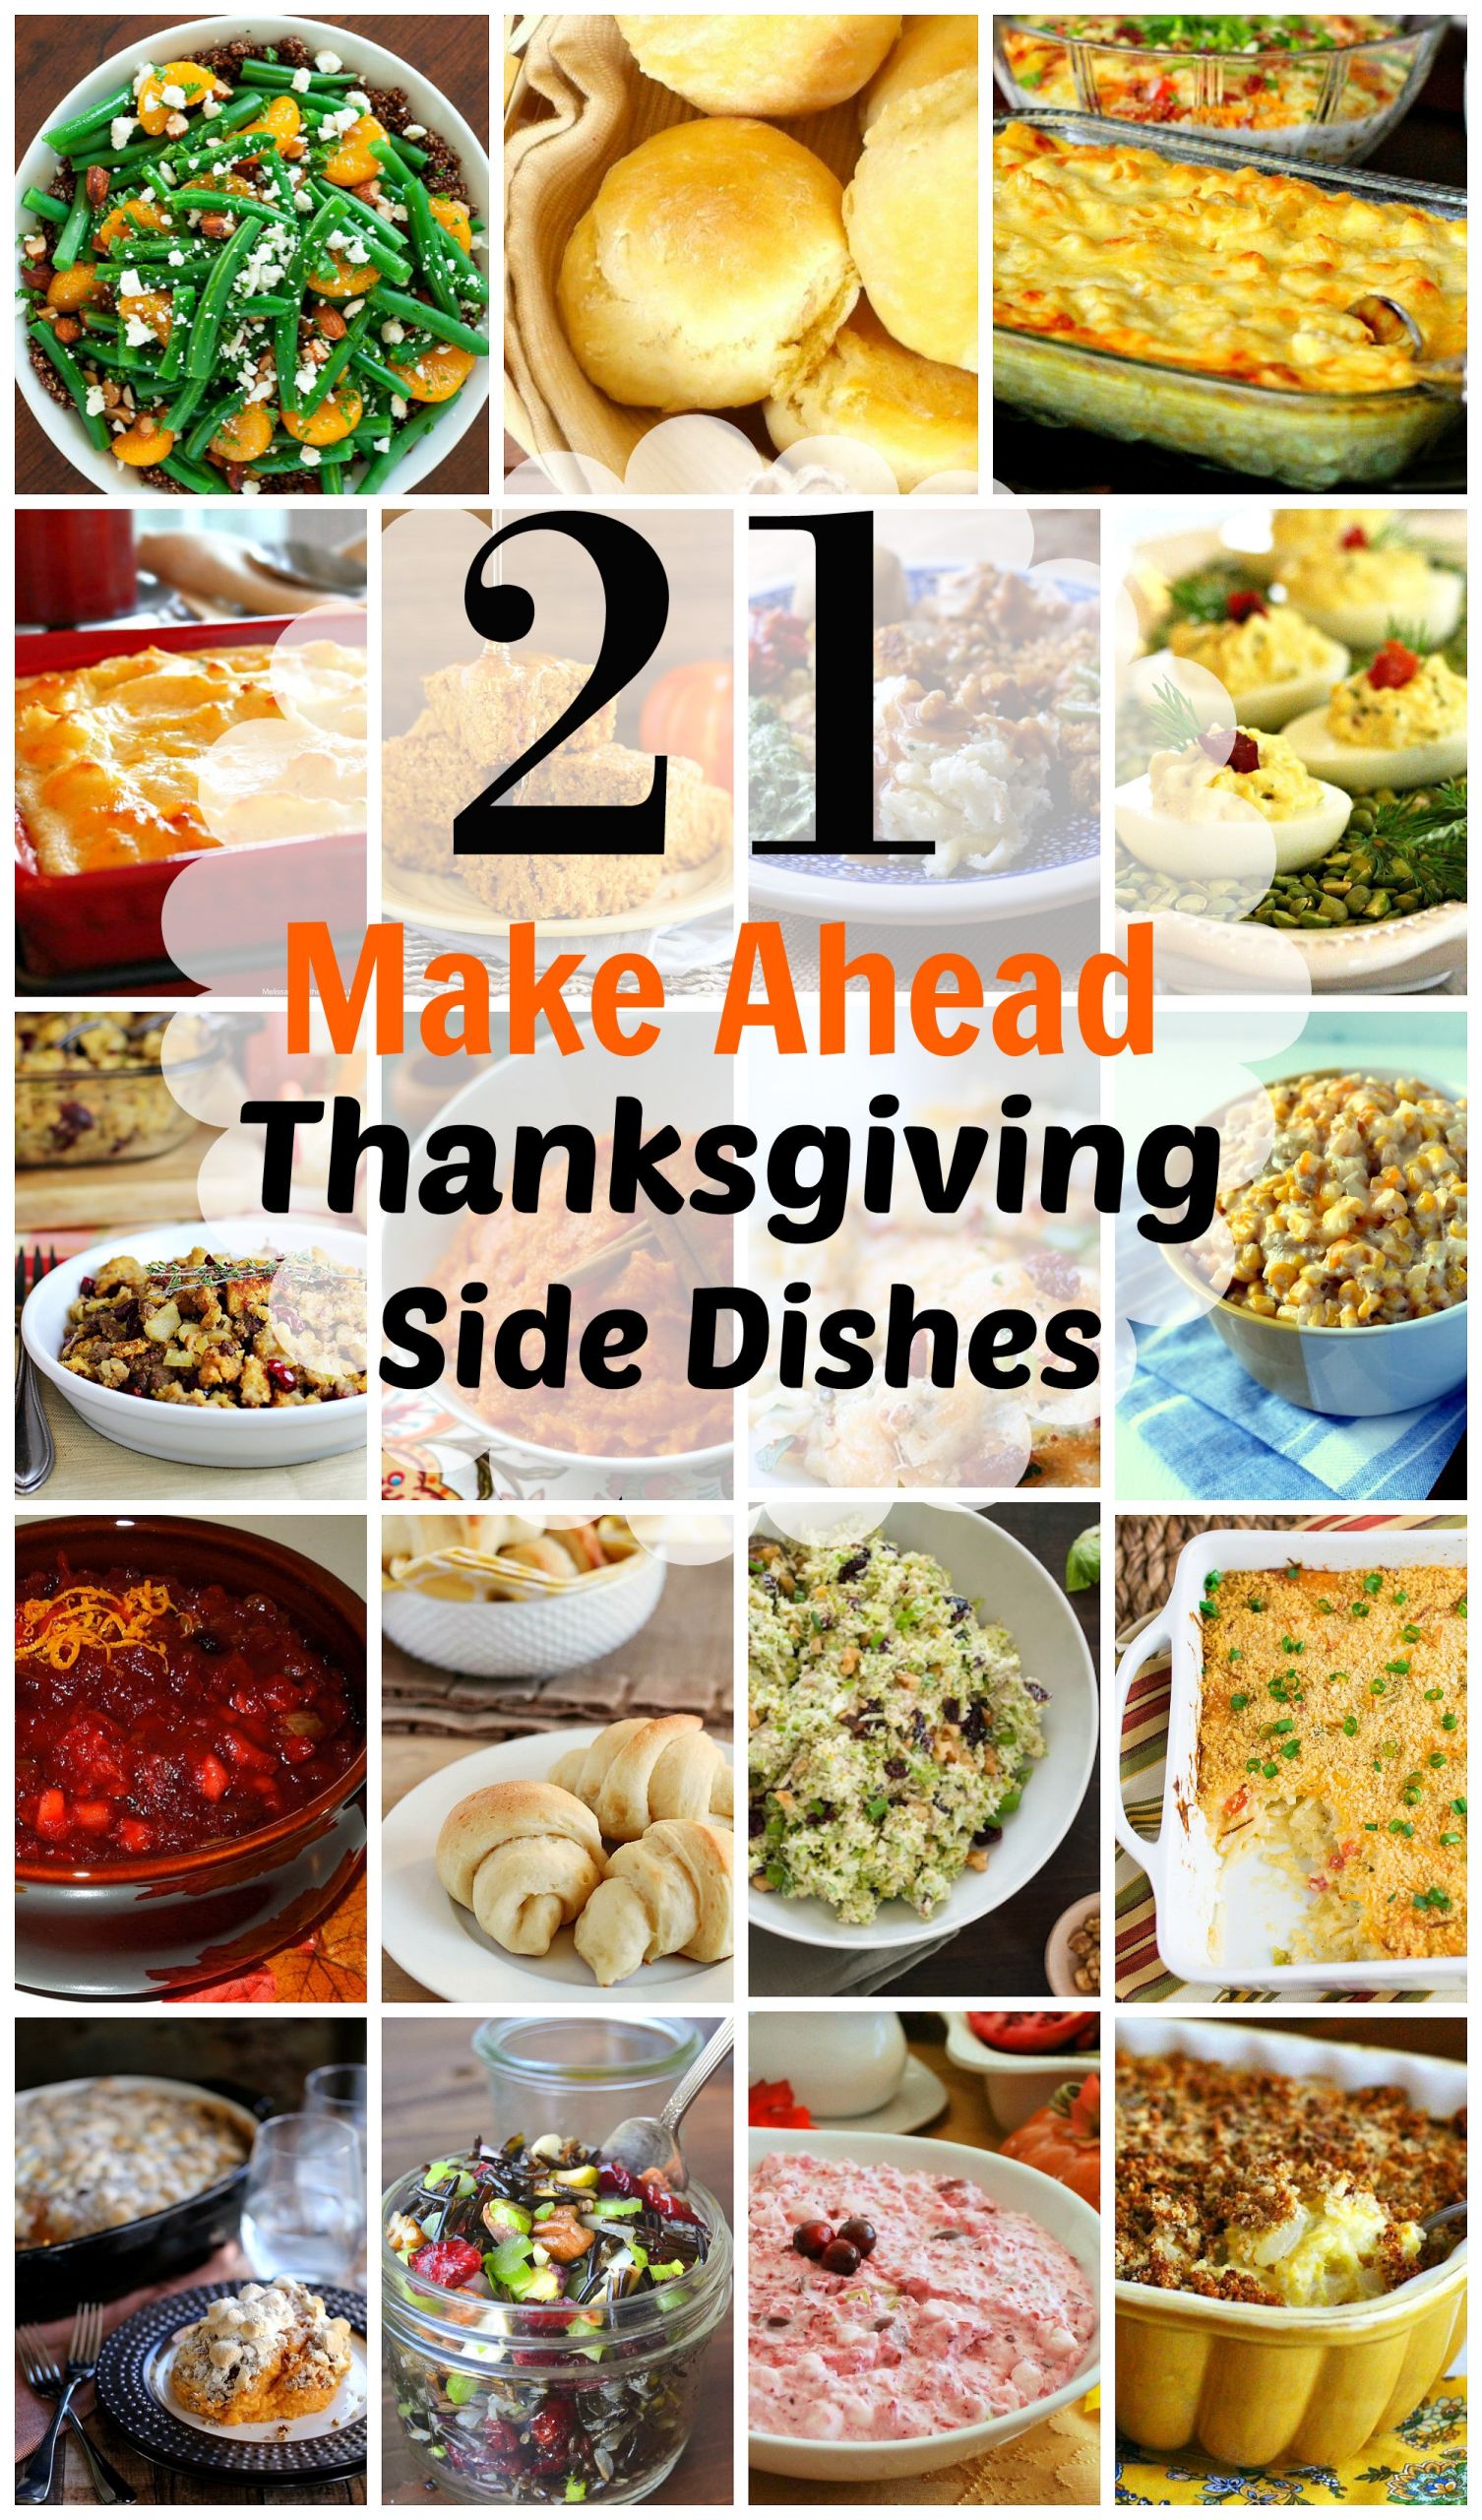 Make Ahead Sides For Thanksgiving
 21 Spectacular Make Ahead Thanksgiving Side Dishes